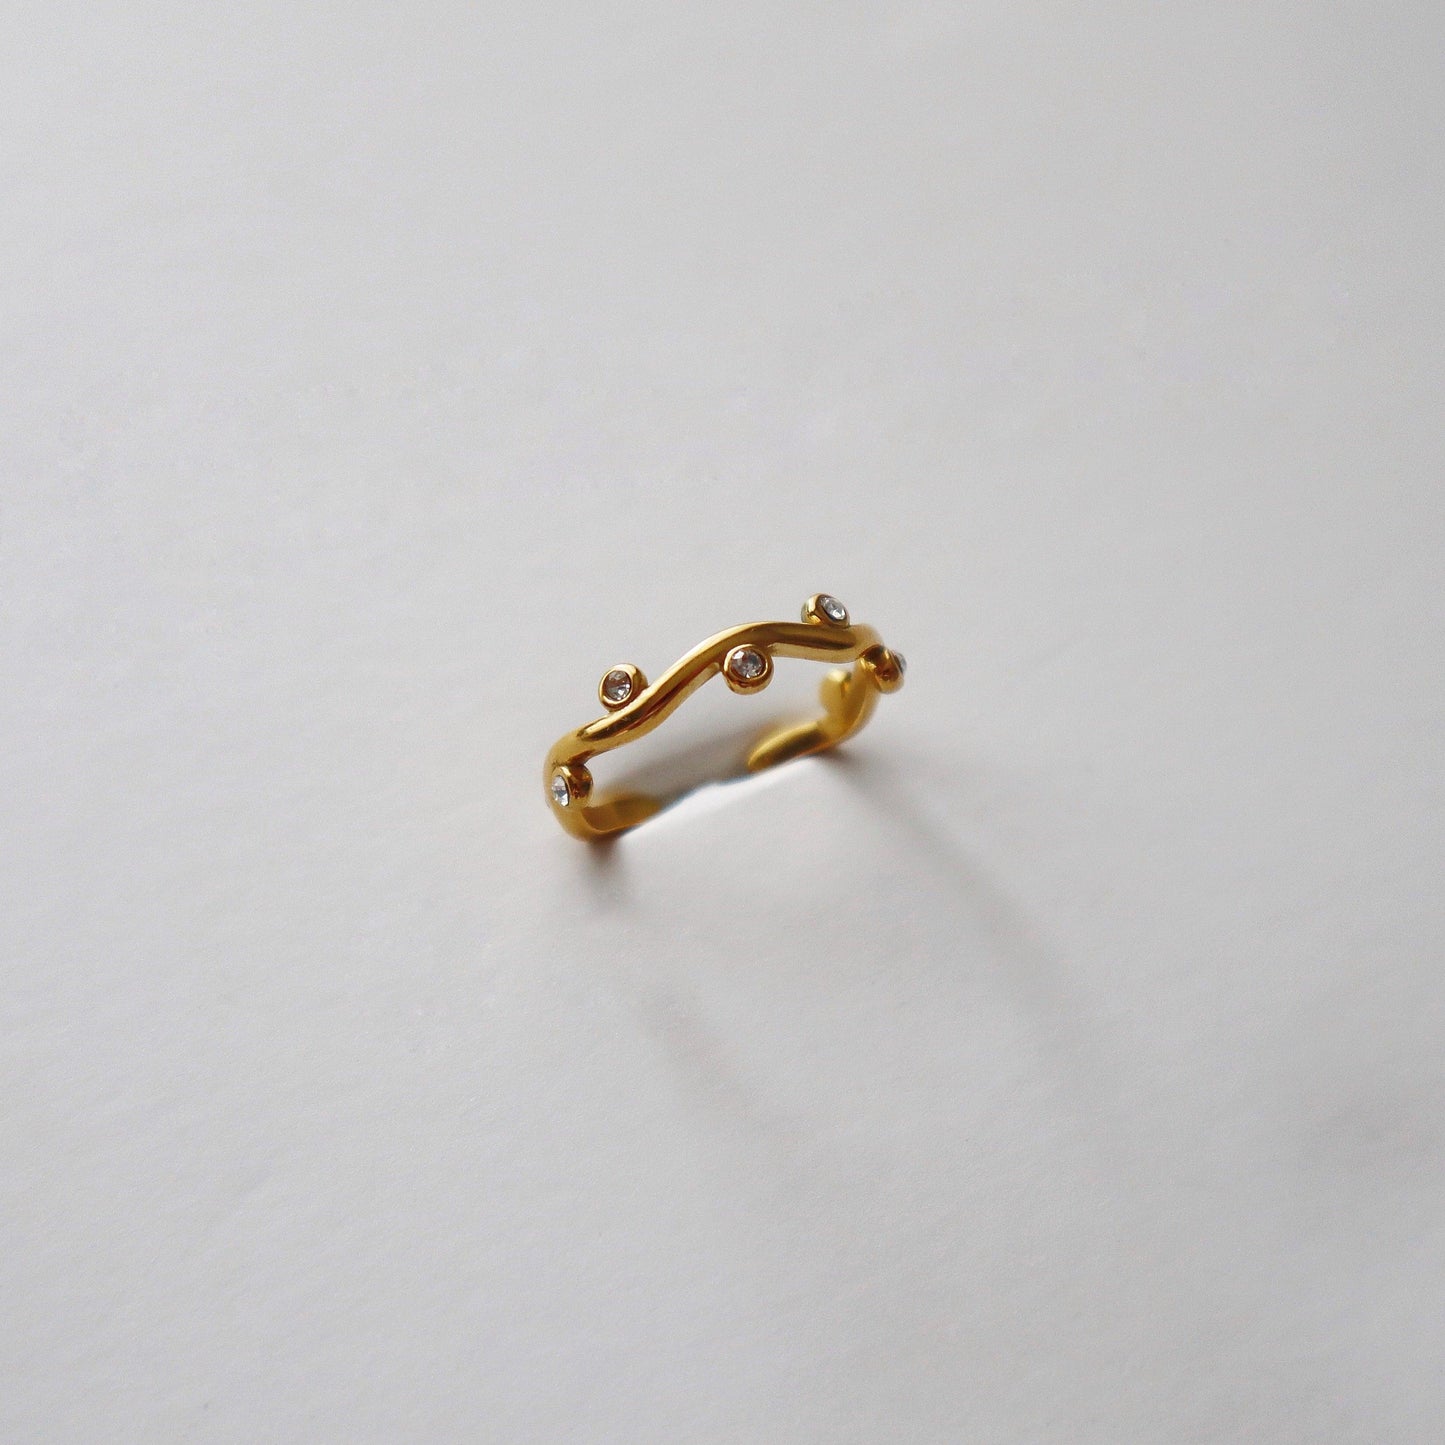 Vine Ring | CZ Adjustable Ring - JESSA JEWELRY | GOLD JEWELRY; dainty, affordable gold everyday jewelry. Tarnish free, water-resistant, hypoallergenic. Jewelry for everyday wear